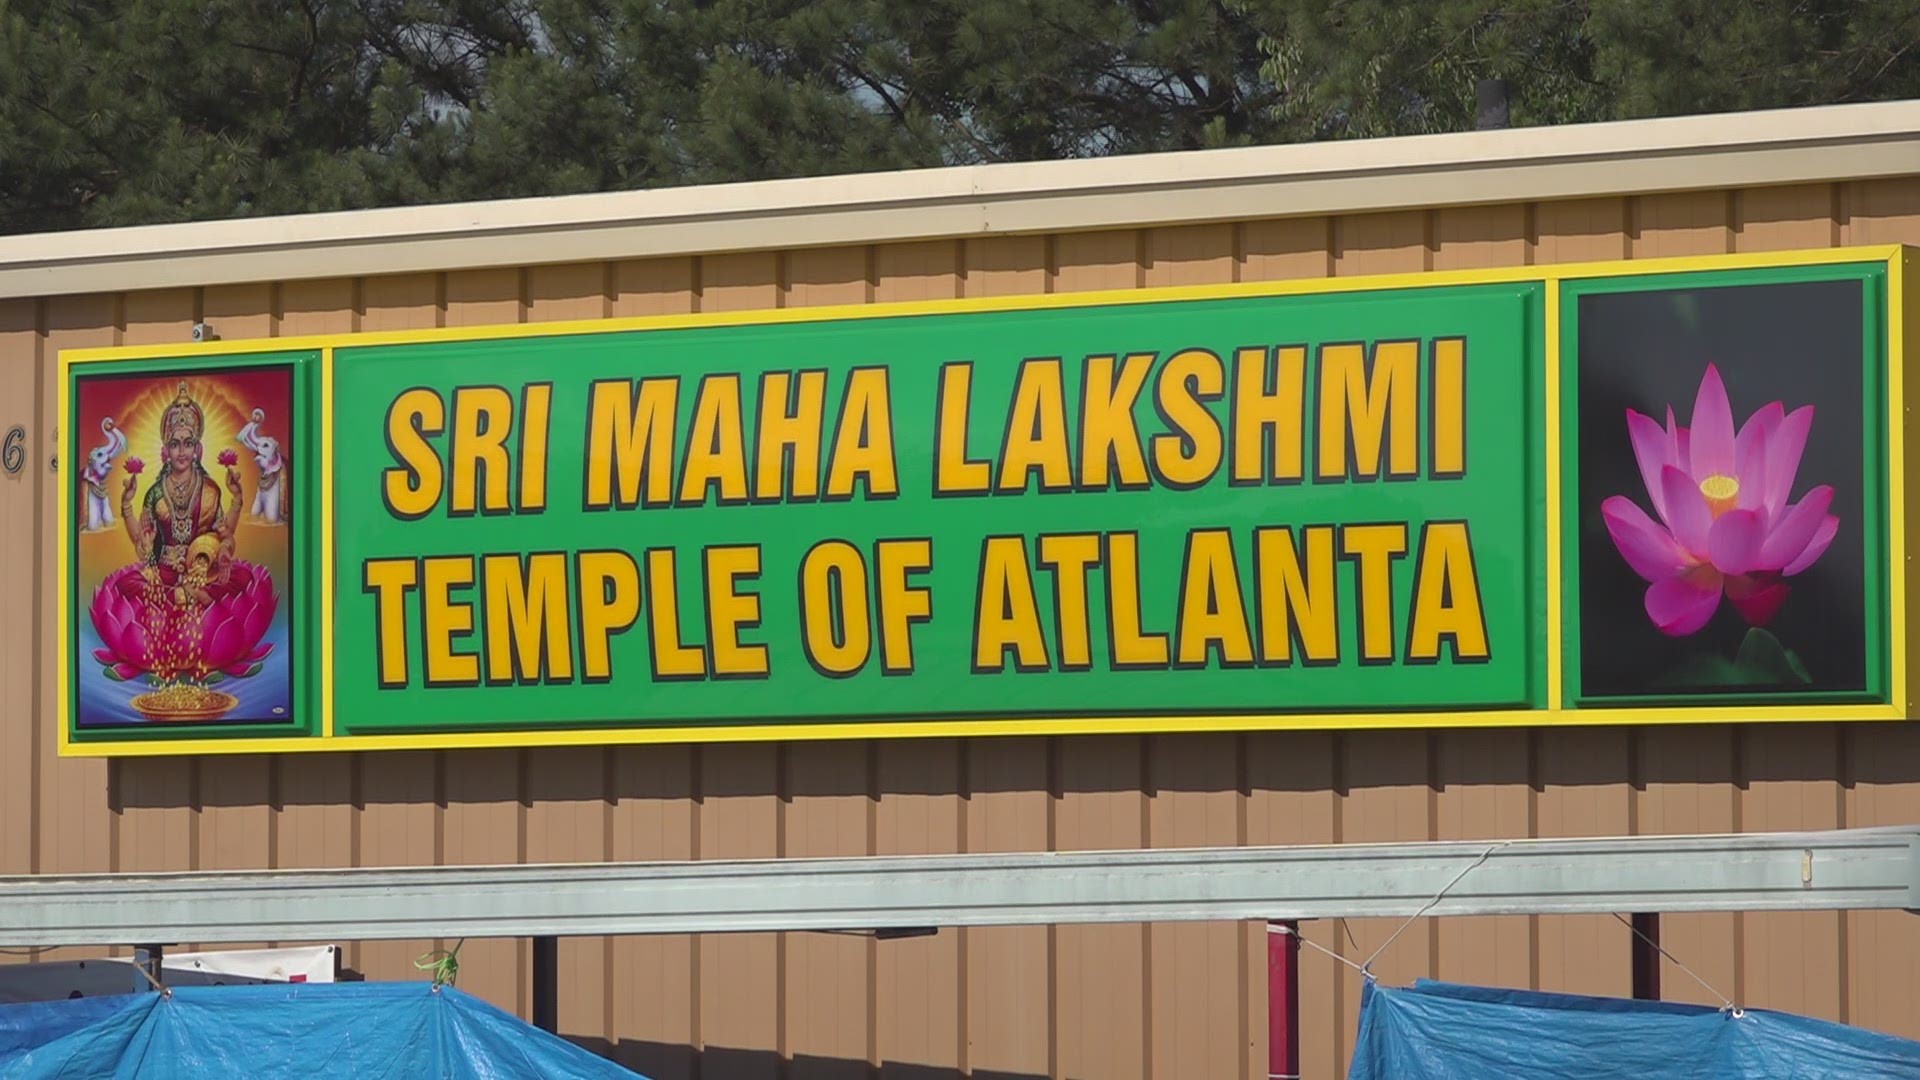 Authorities continue searching for the people who stole $15,000 worth of jewelry from a Hindu temple in Forsyth County.